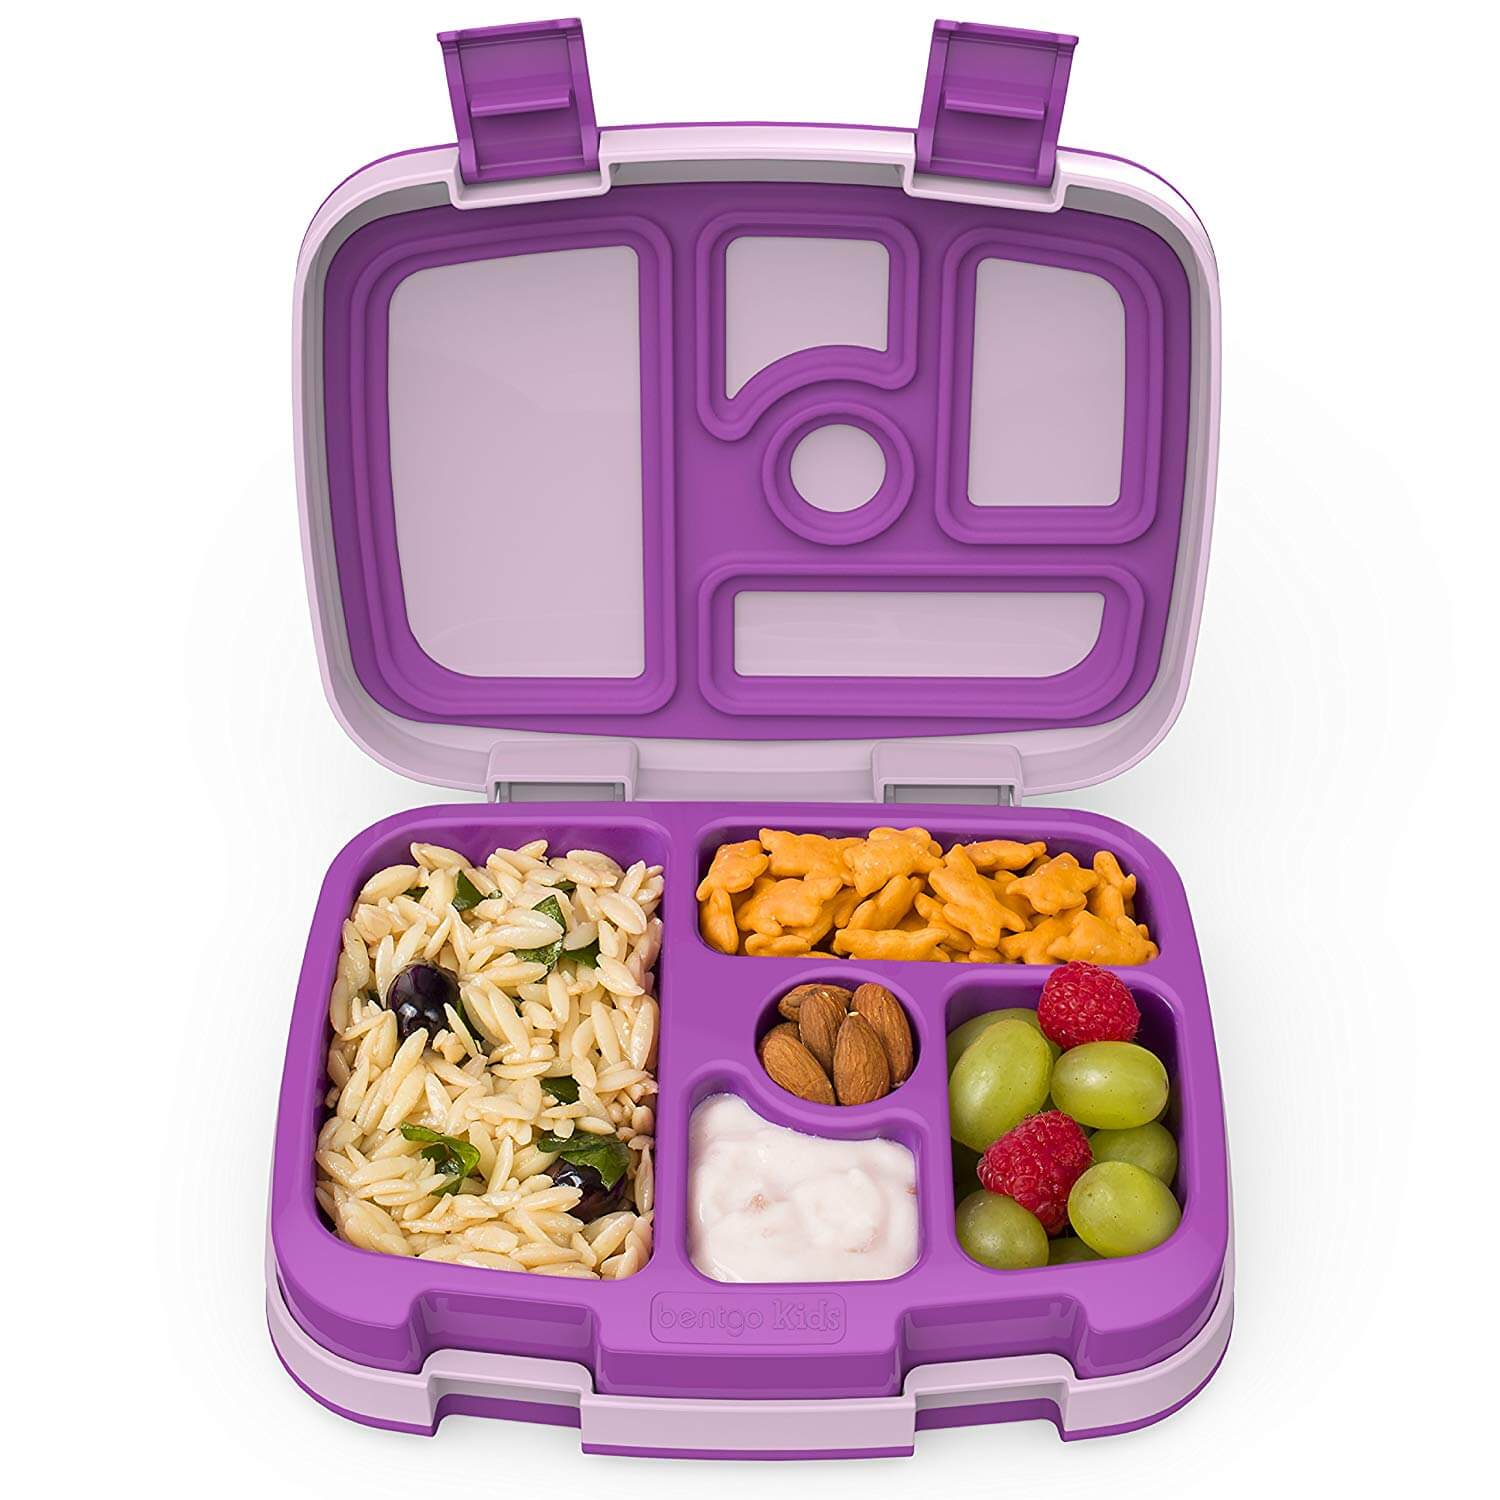 Kids Favourite Characters Lunch Box Great Lunch Box for School Frozen Children Lunch Box Container with Plastic Spoon and Fork